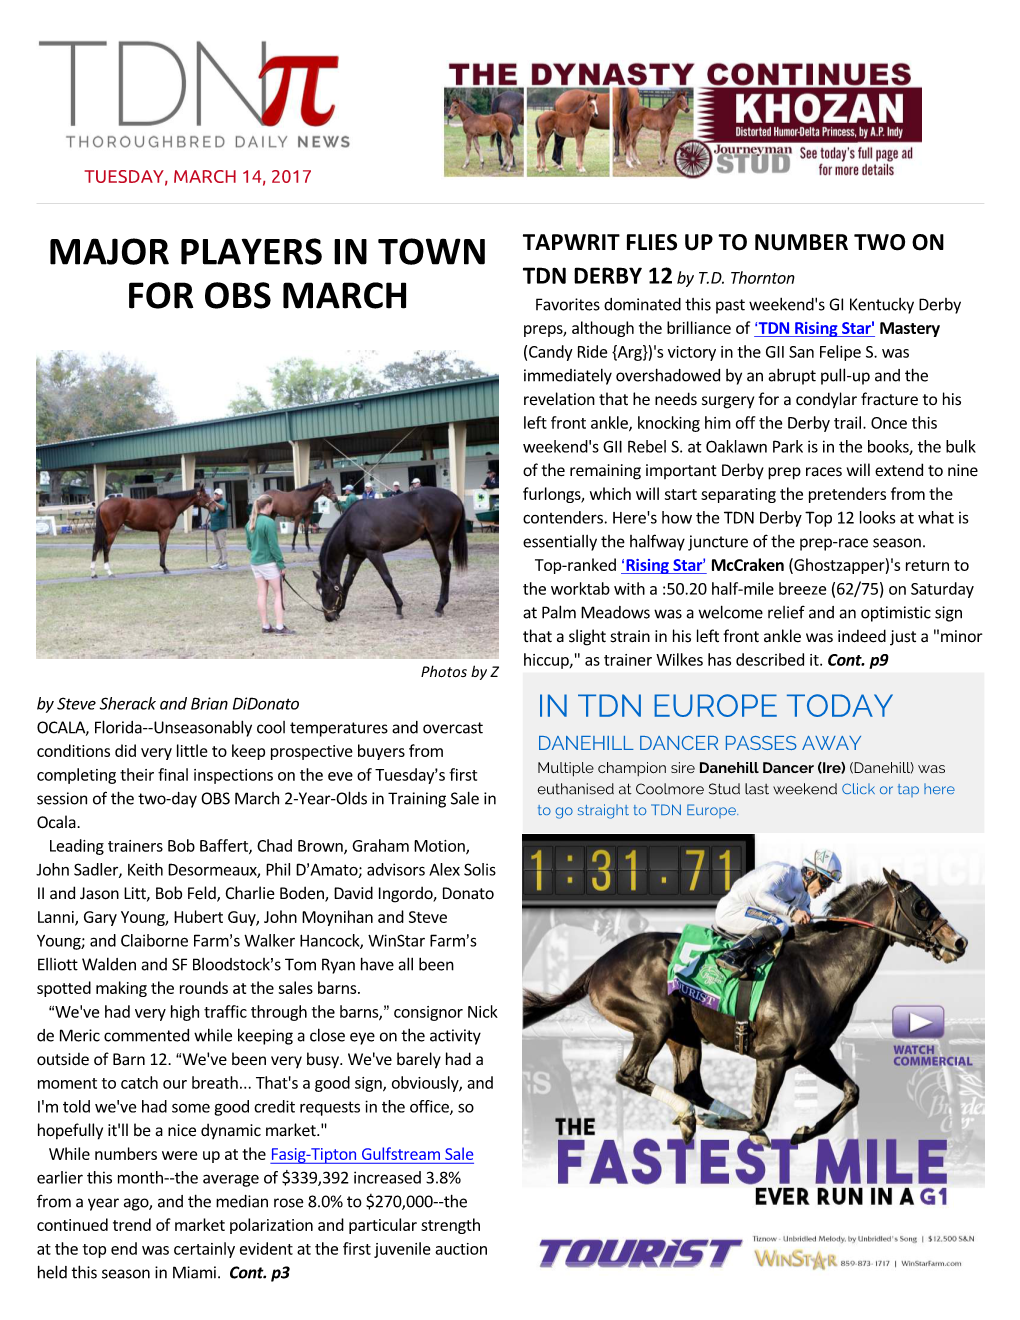 Major Players in Town for OBS March Consignor Quincy Adams of Q Bar J Thoroughbreds Added, "I Think It=S Going to Be Good Coming from Miami to OBS, There (Cont